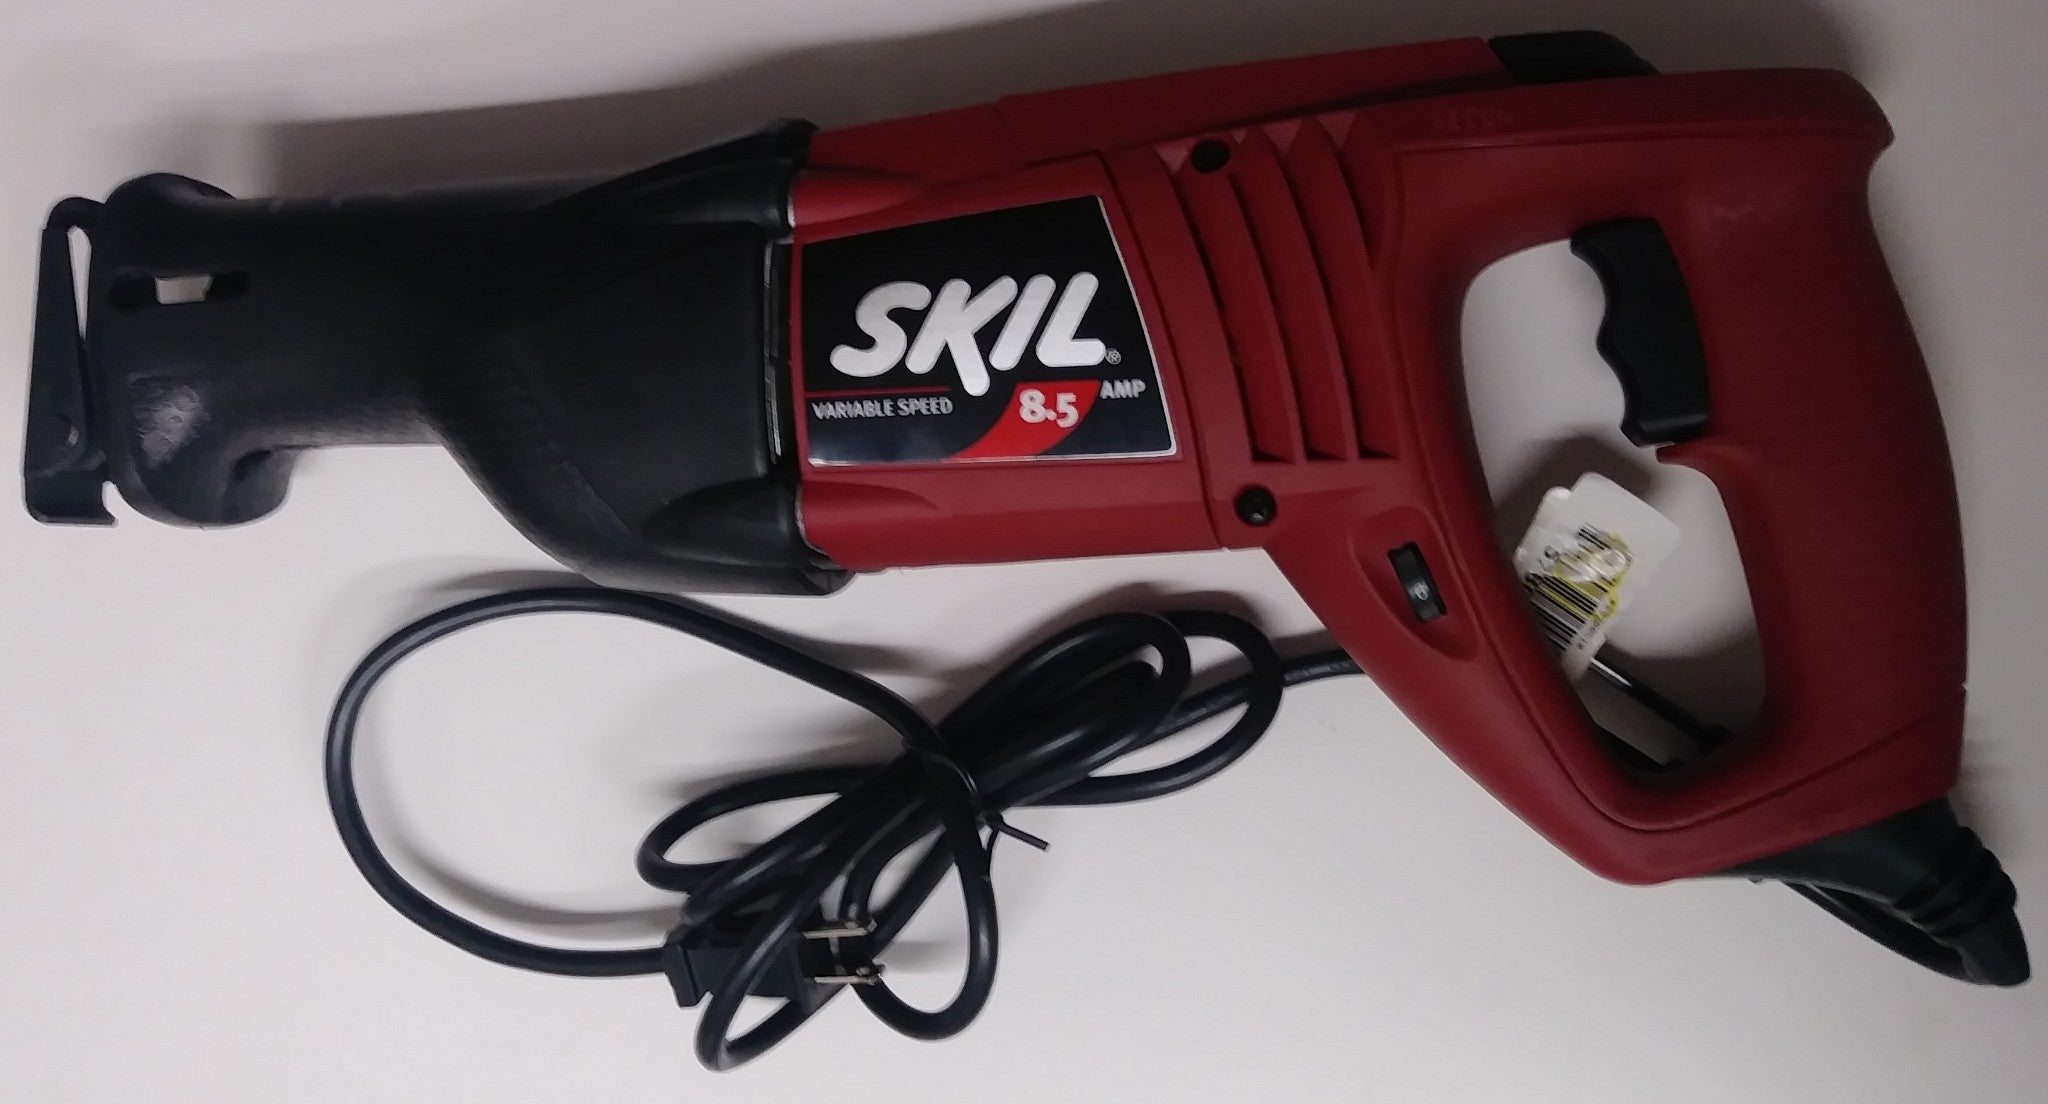 SKIL 9200-02-RT 8.5 Amp Variable Speed Reciprocating Saw